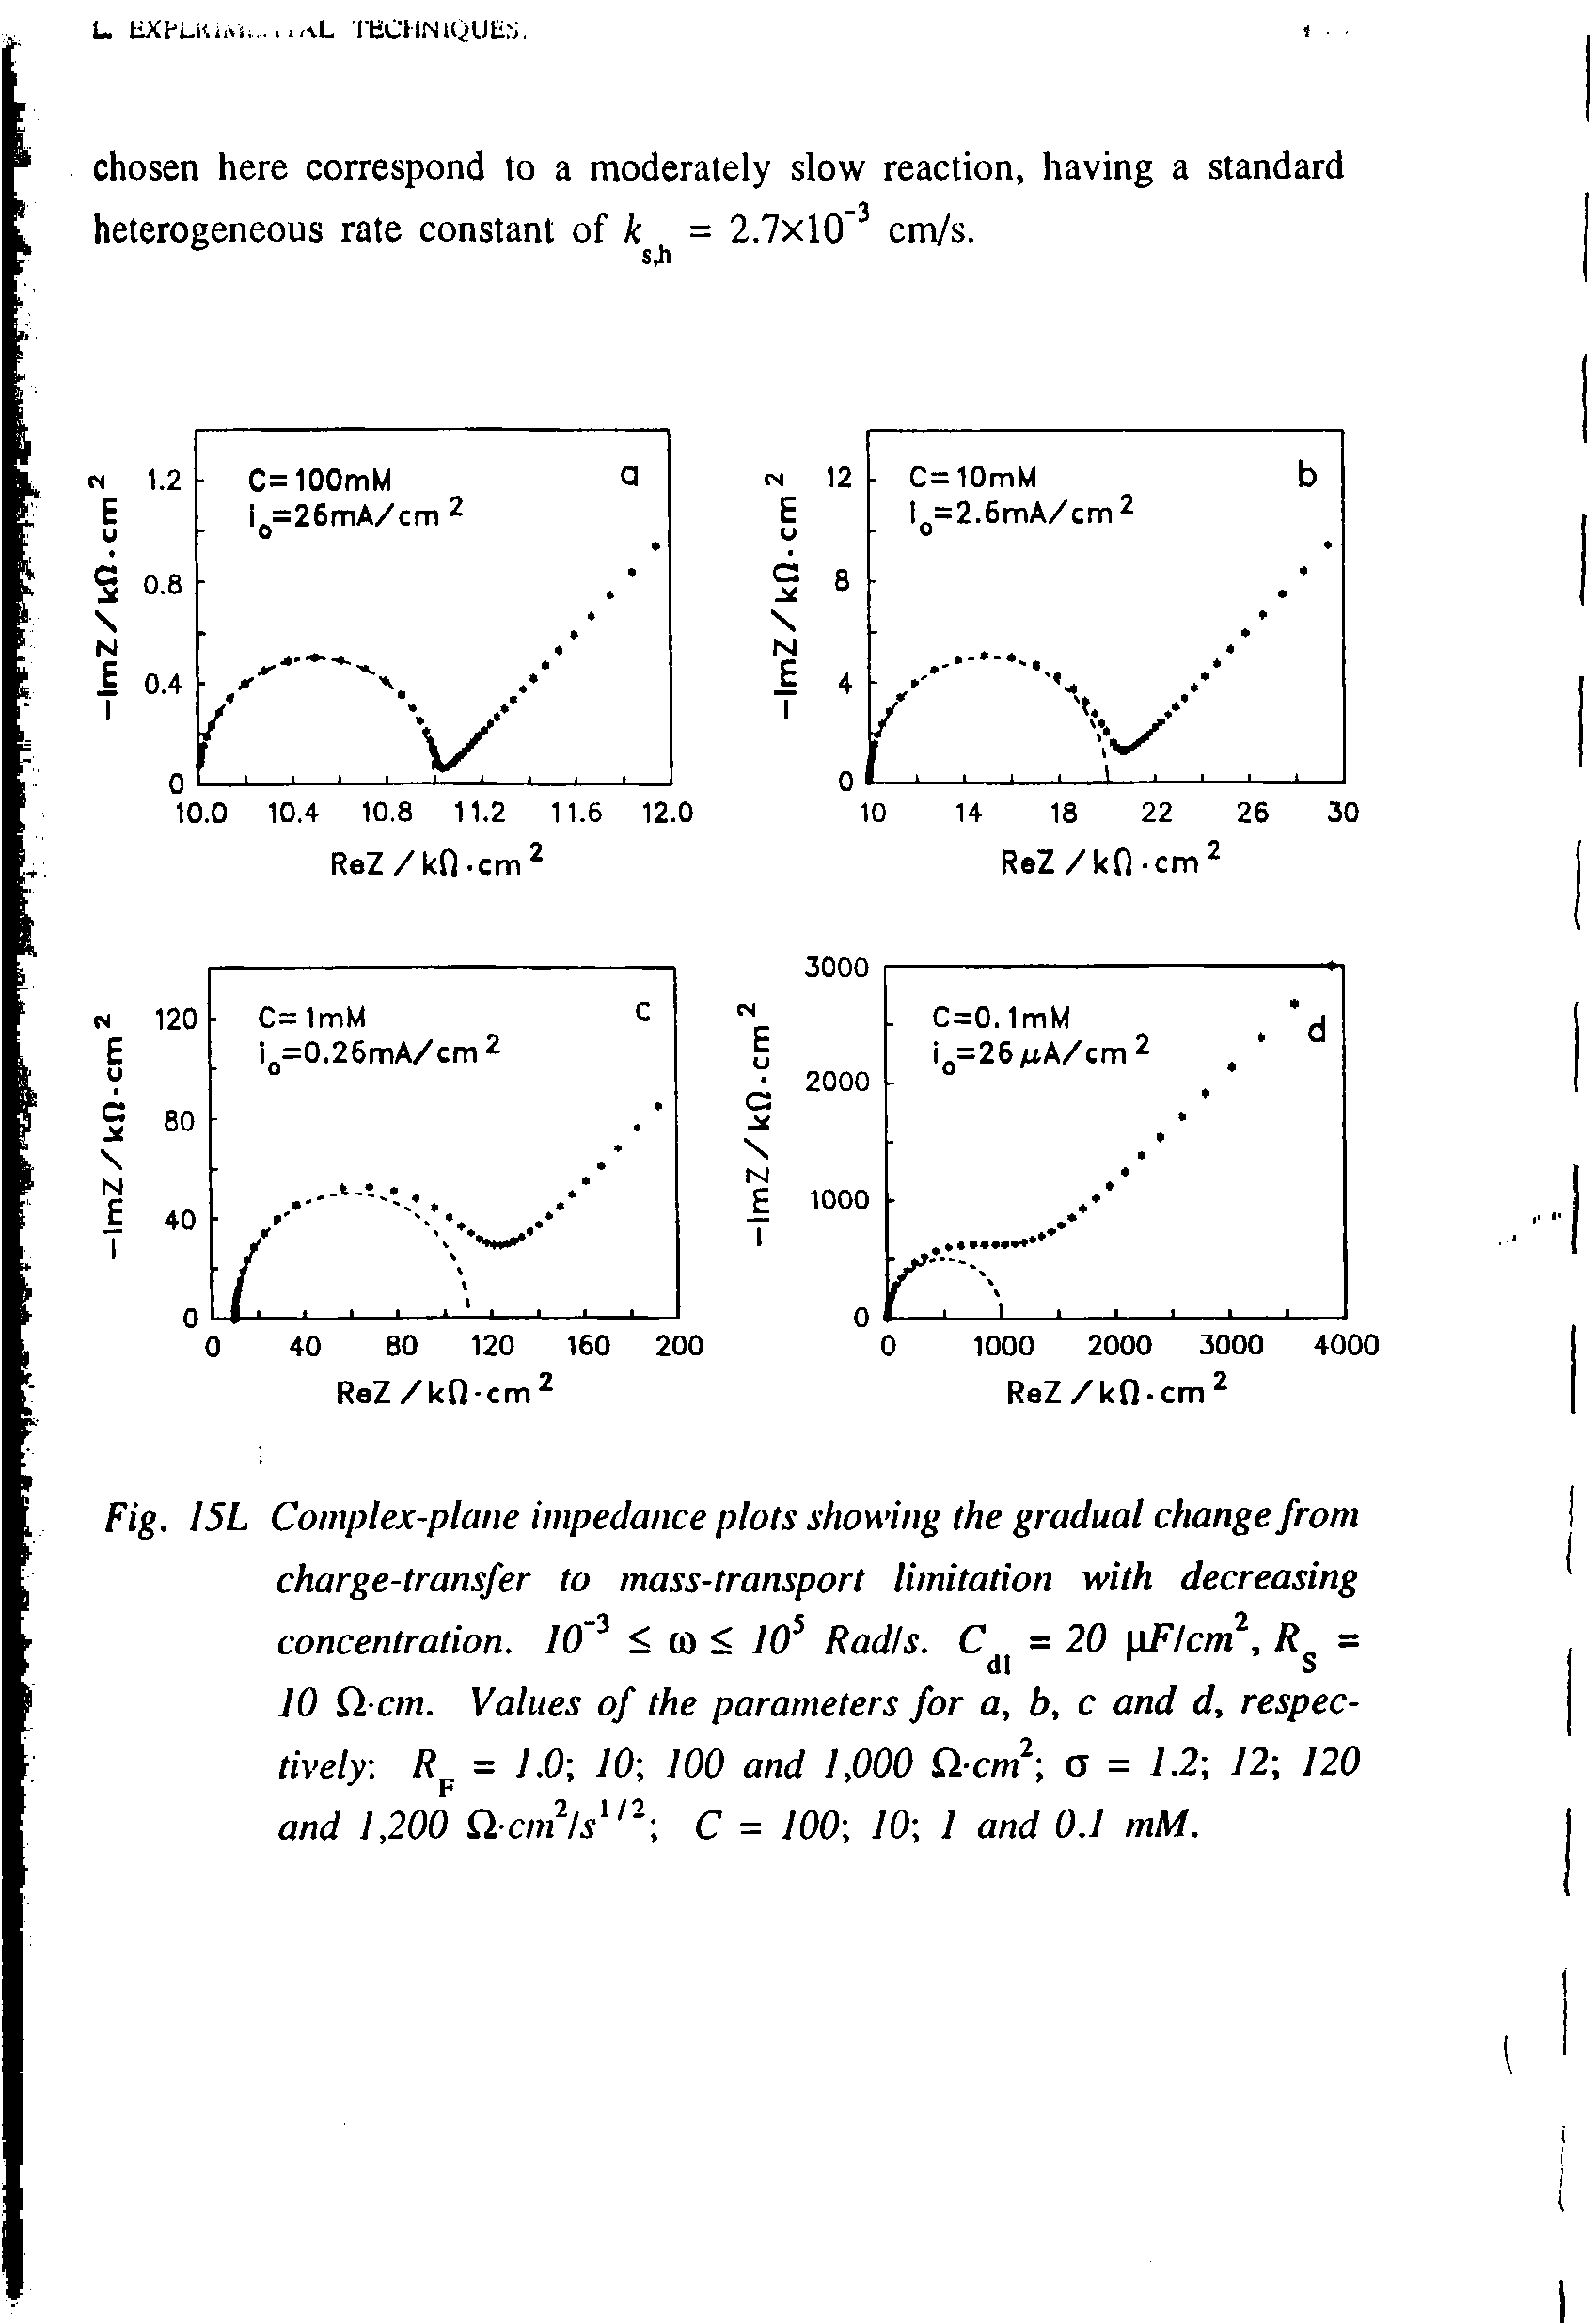 Fig. I5L Complex-plane impedance plots showing the gradual change from charge-transfer to mass-transport limitation with decreasing concentration. 10 < id < 10 Radis. C =20 uFIcn, R =...